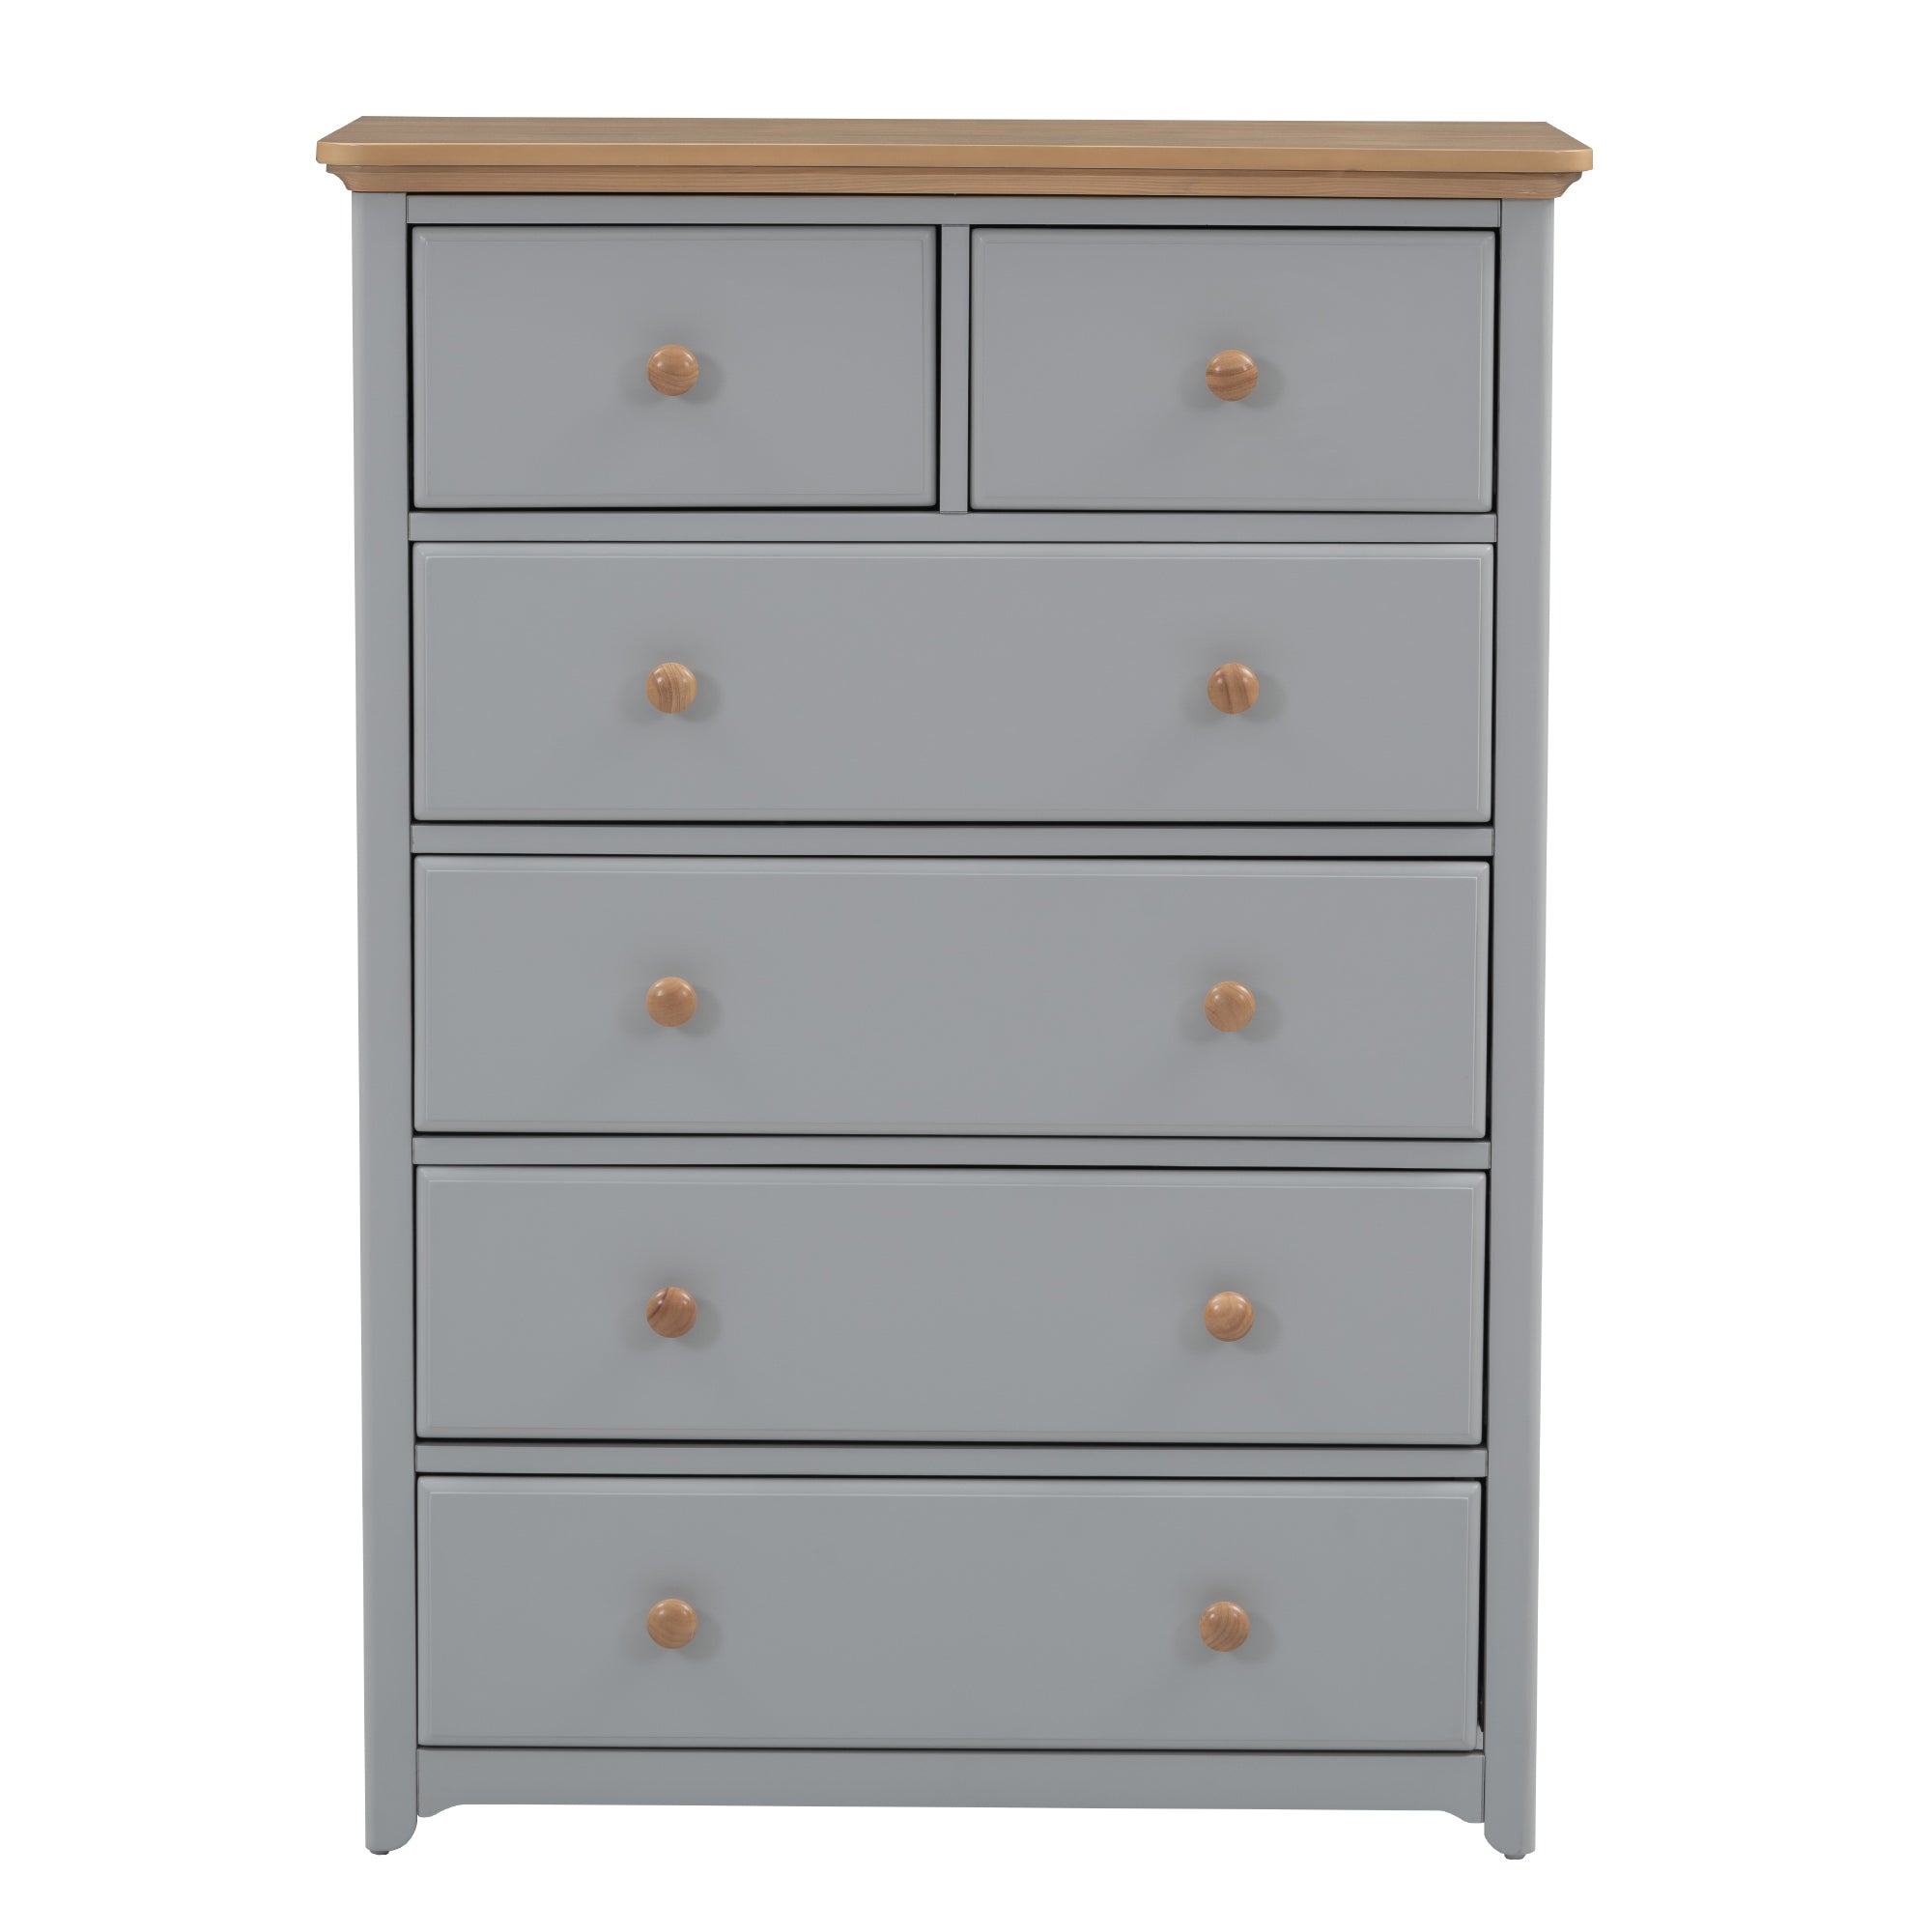 Rustic Wooden Chest with 6 Drawers,Storage Cabinet for Bedroom,Gray+Natrual